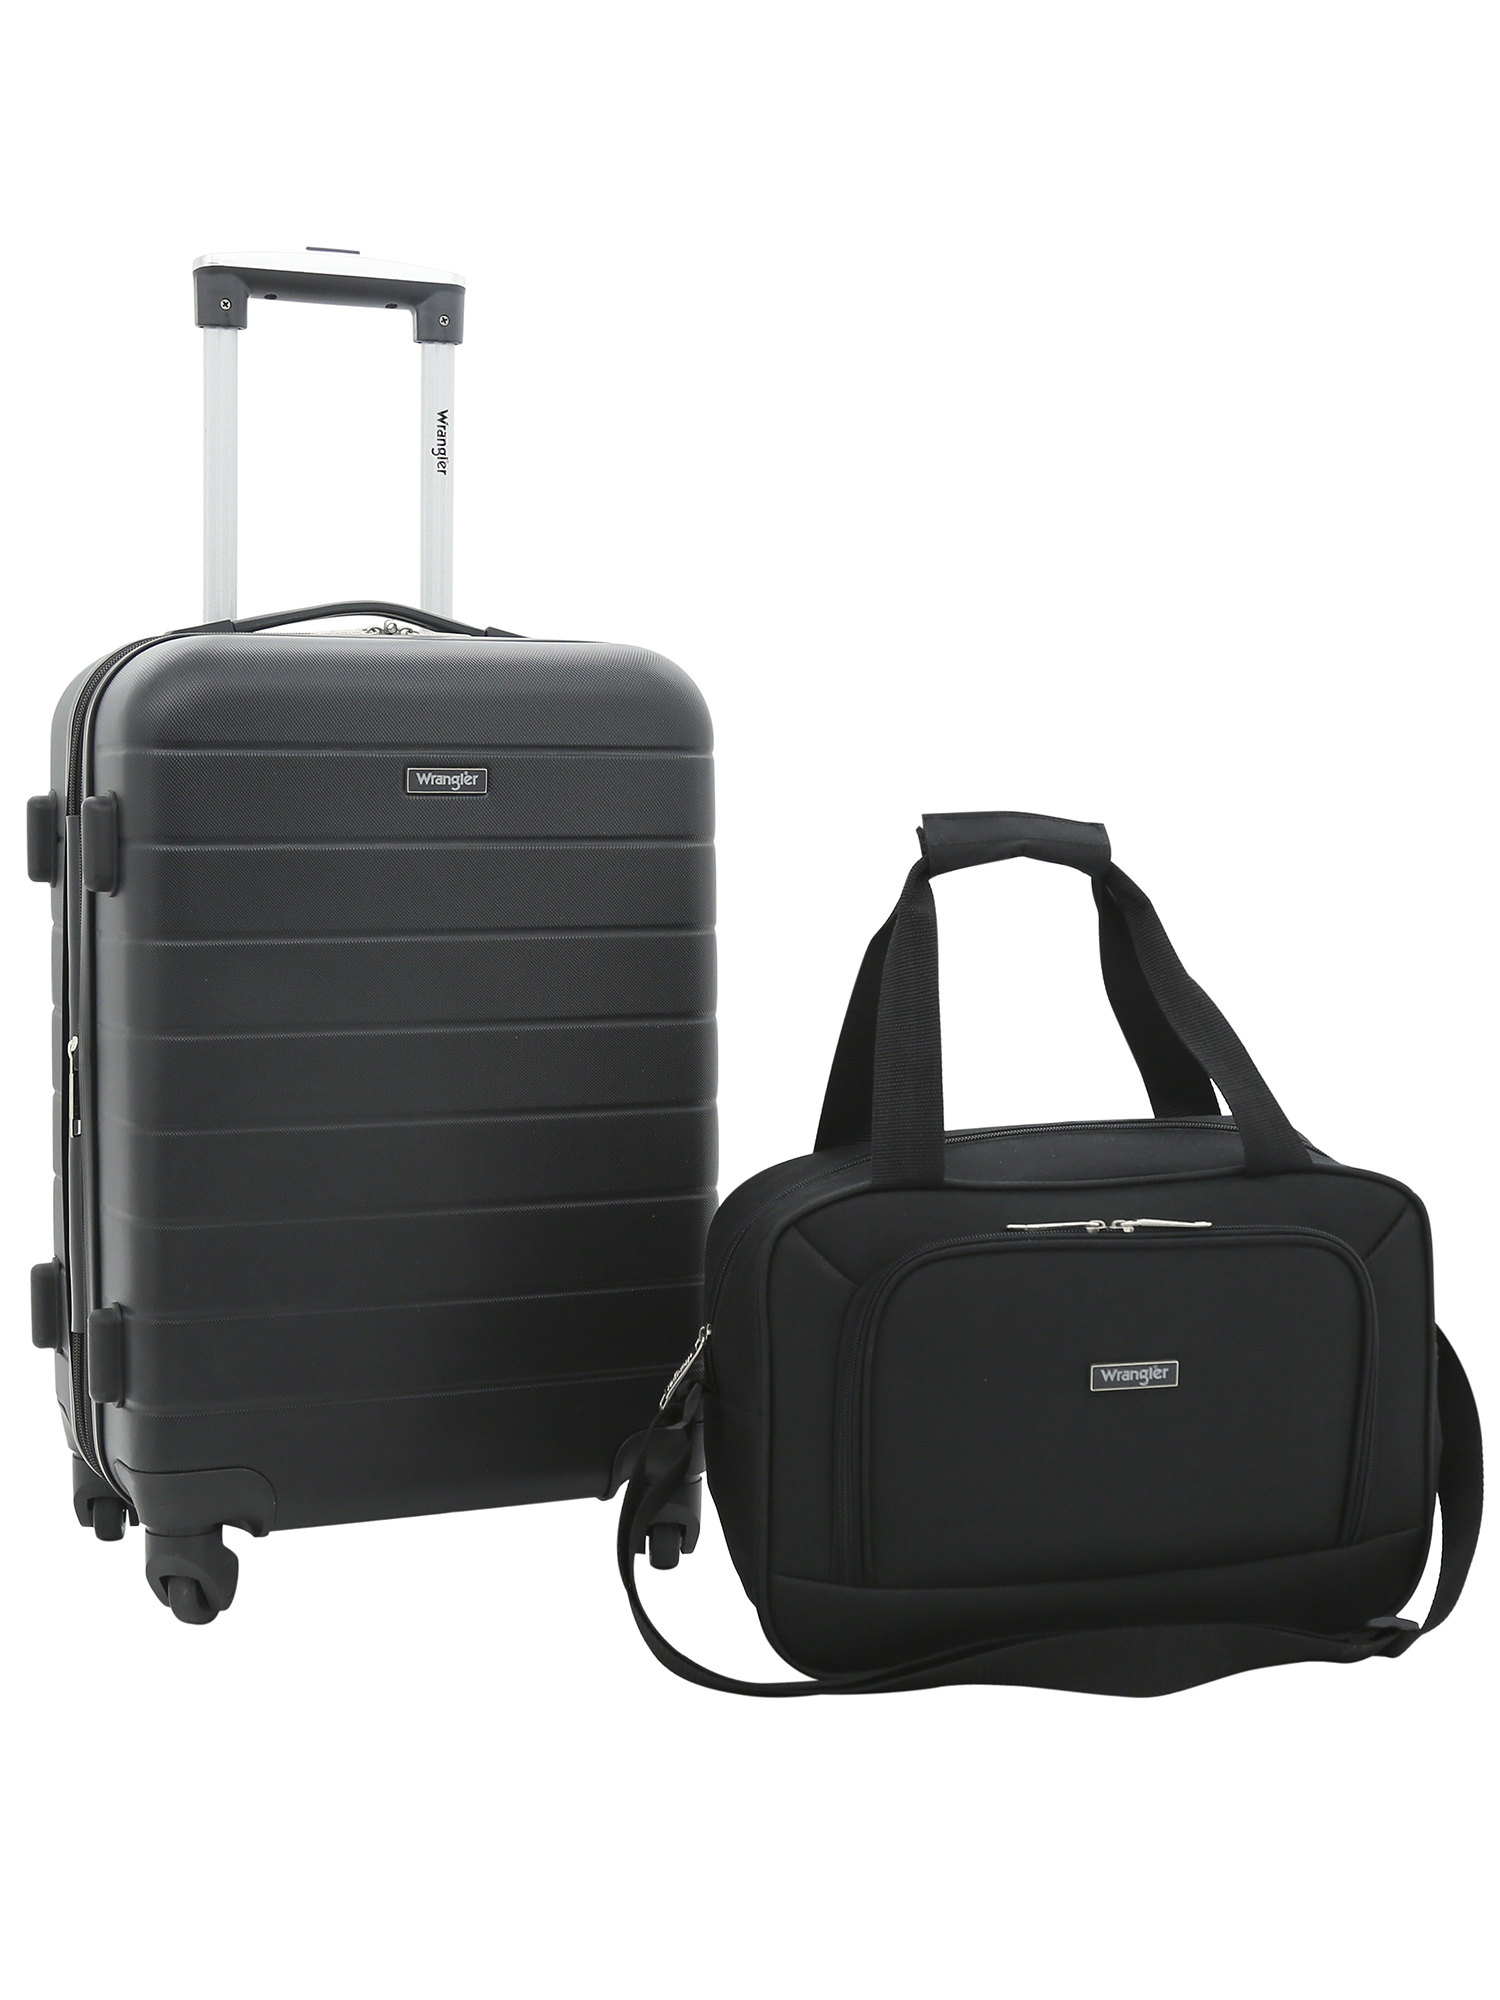 Wrangler 2pc Expandable Rolling Carry-on Set, Black - image 1 of 14